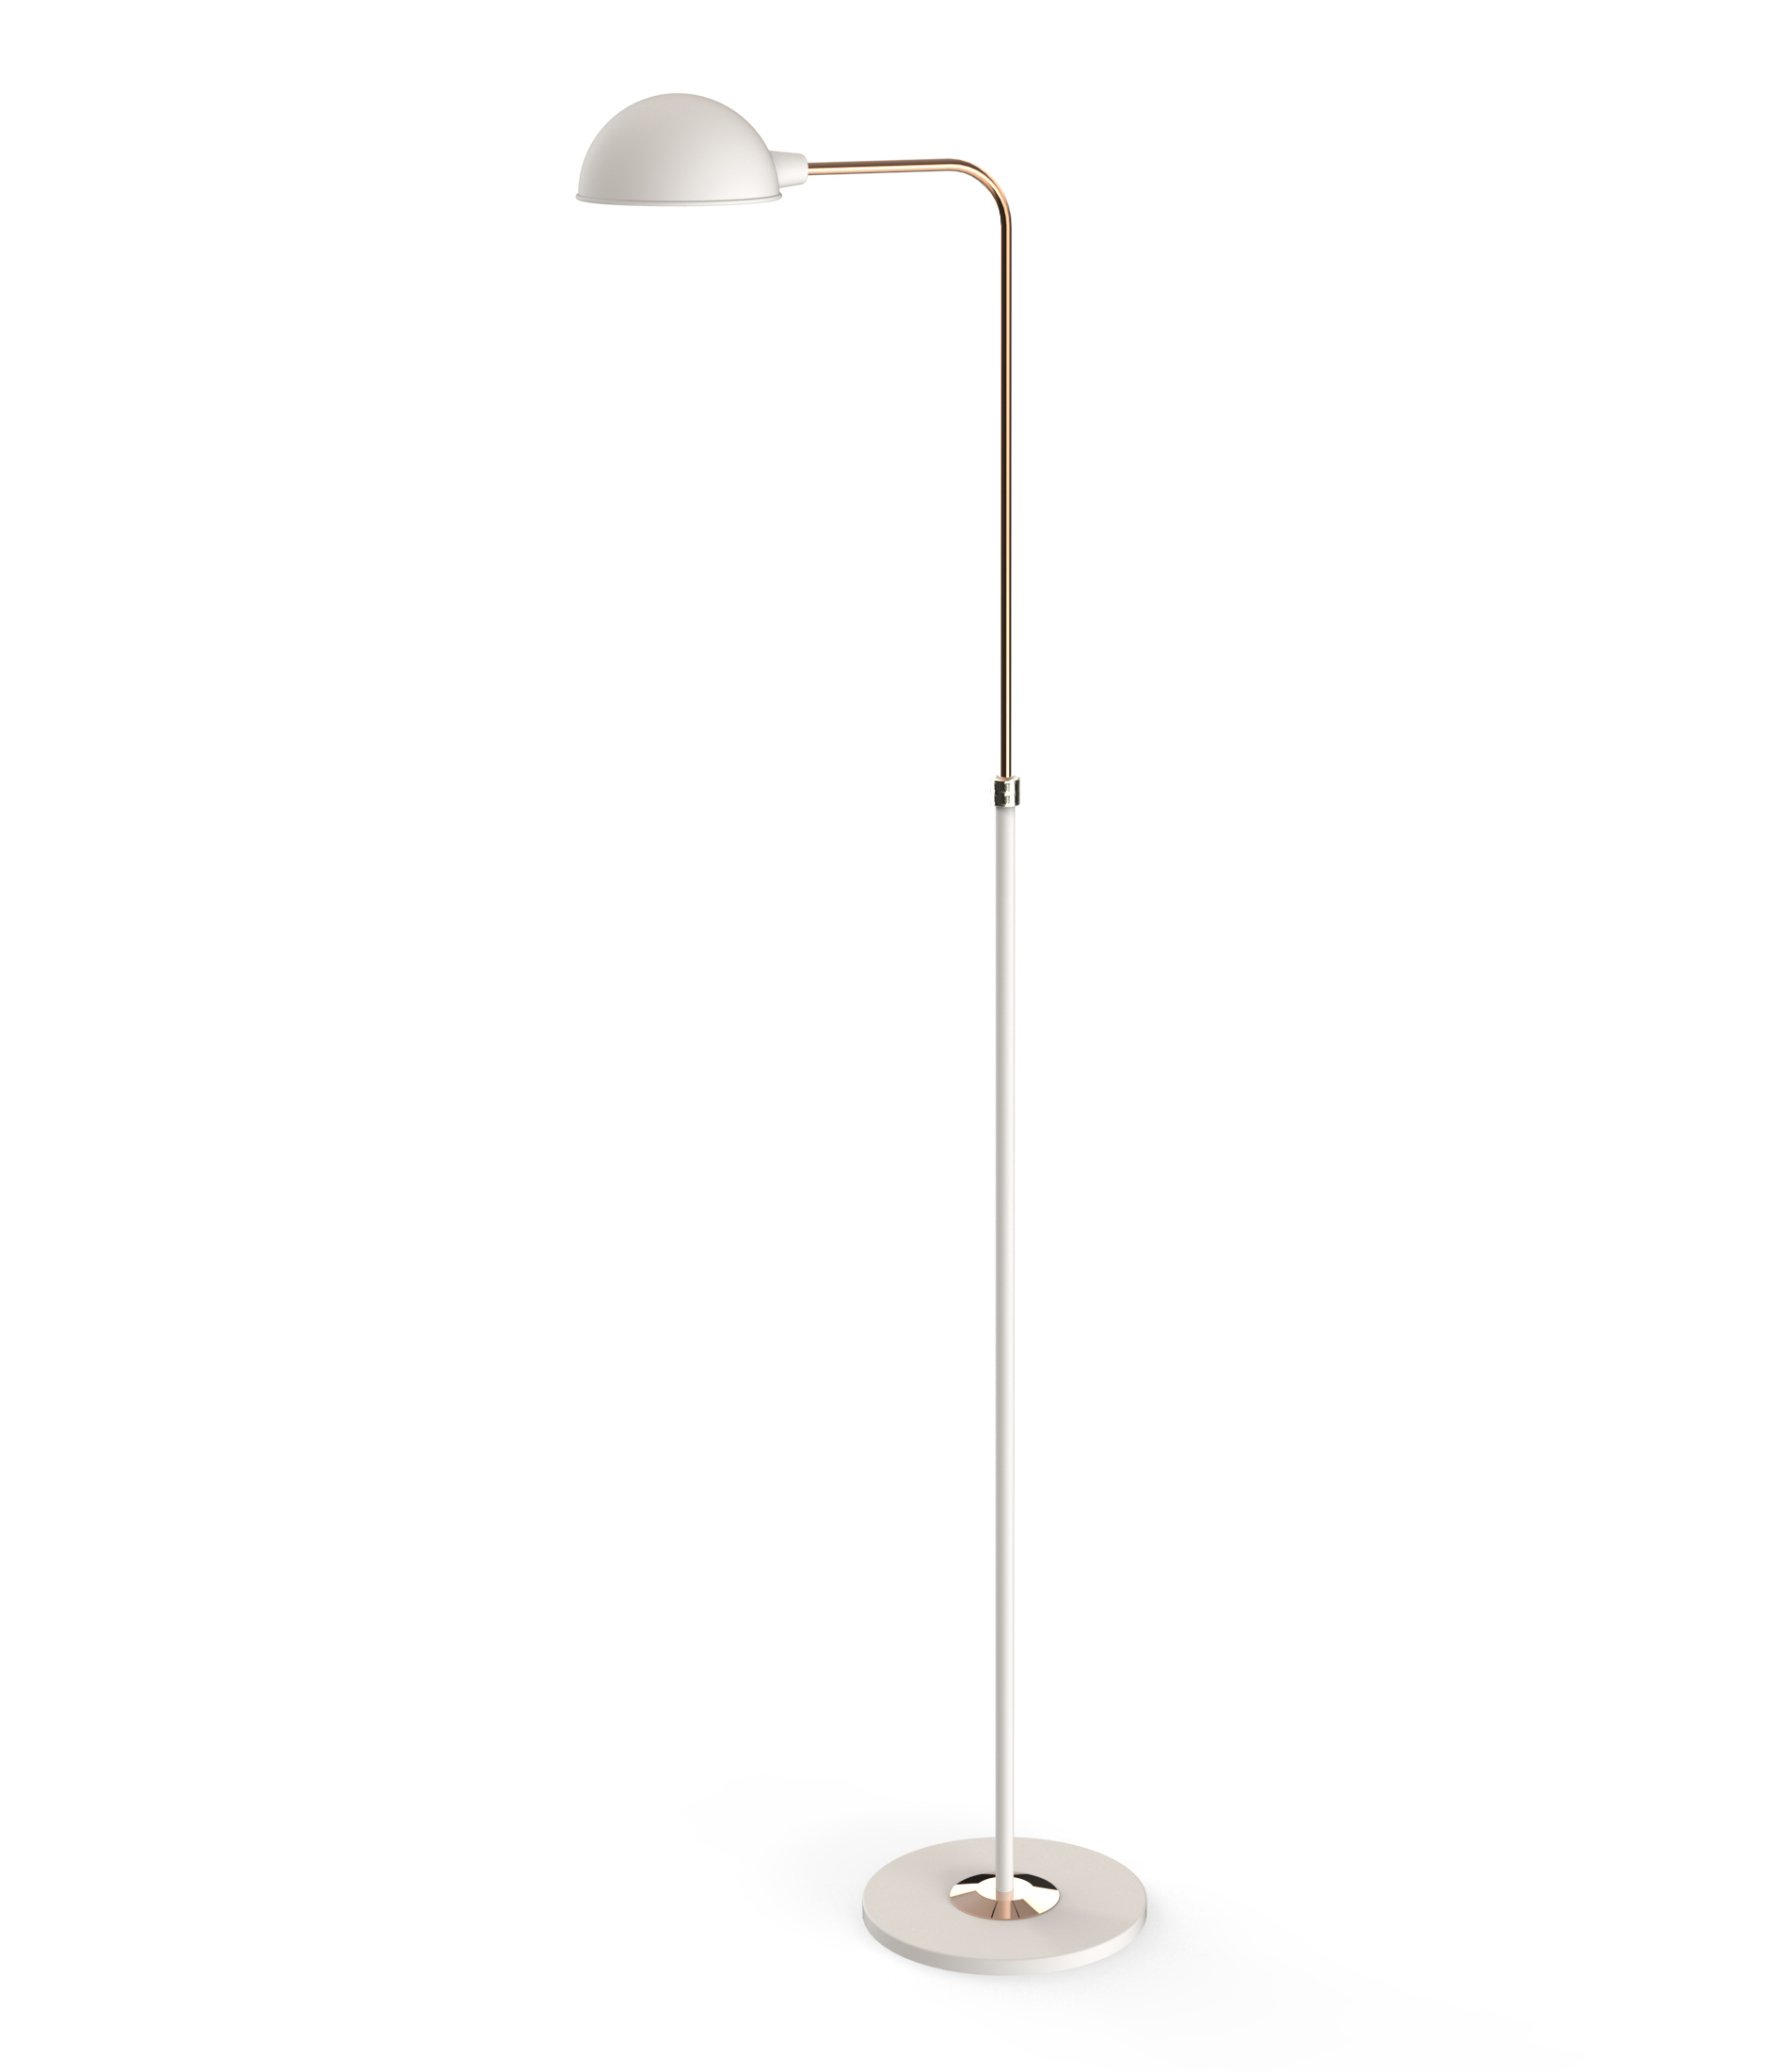 Lamp Lighting Bright Floor Lamps Pixball Too Floors With intended for measurements 1904 X 2200